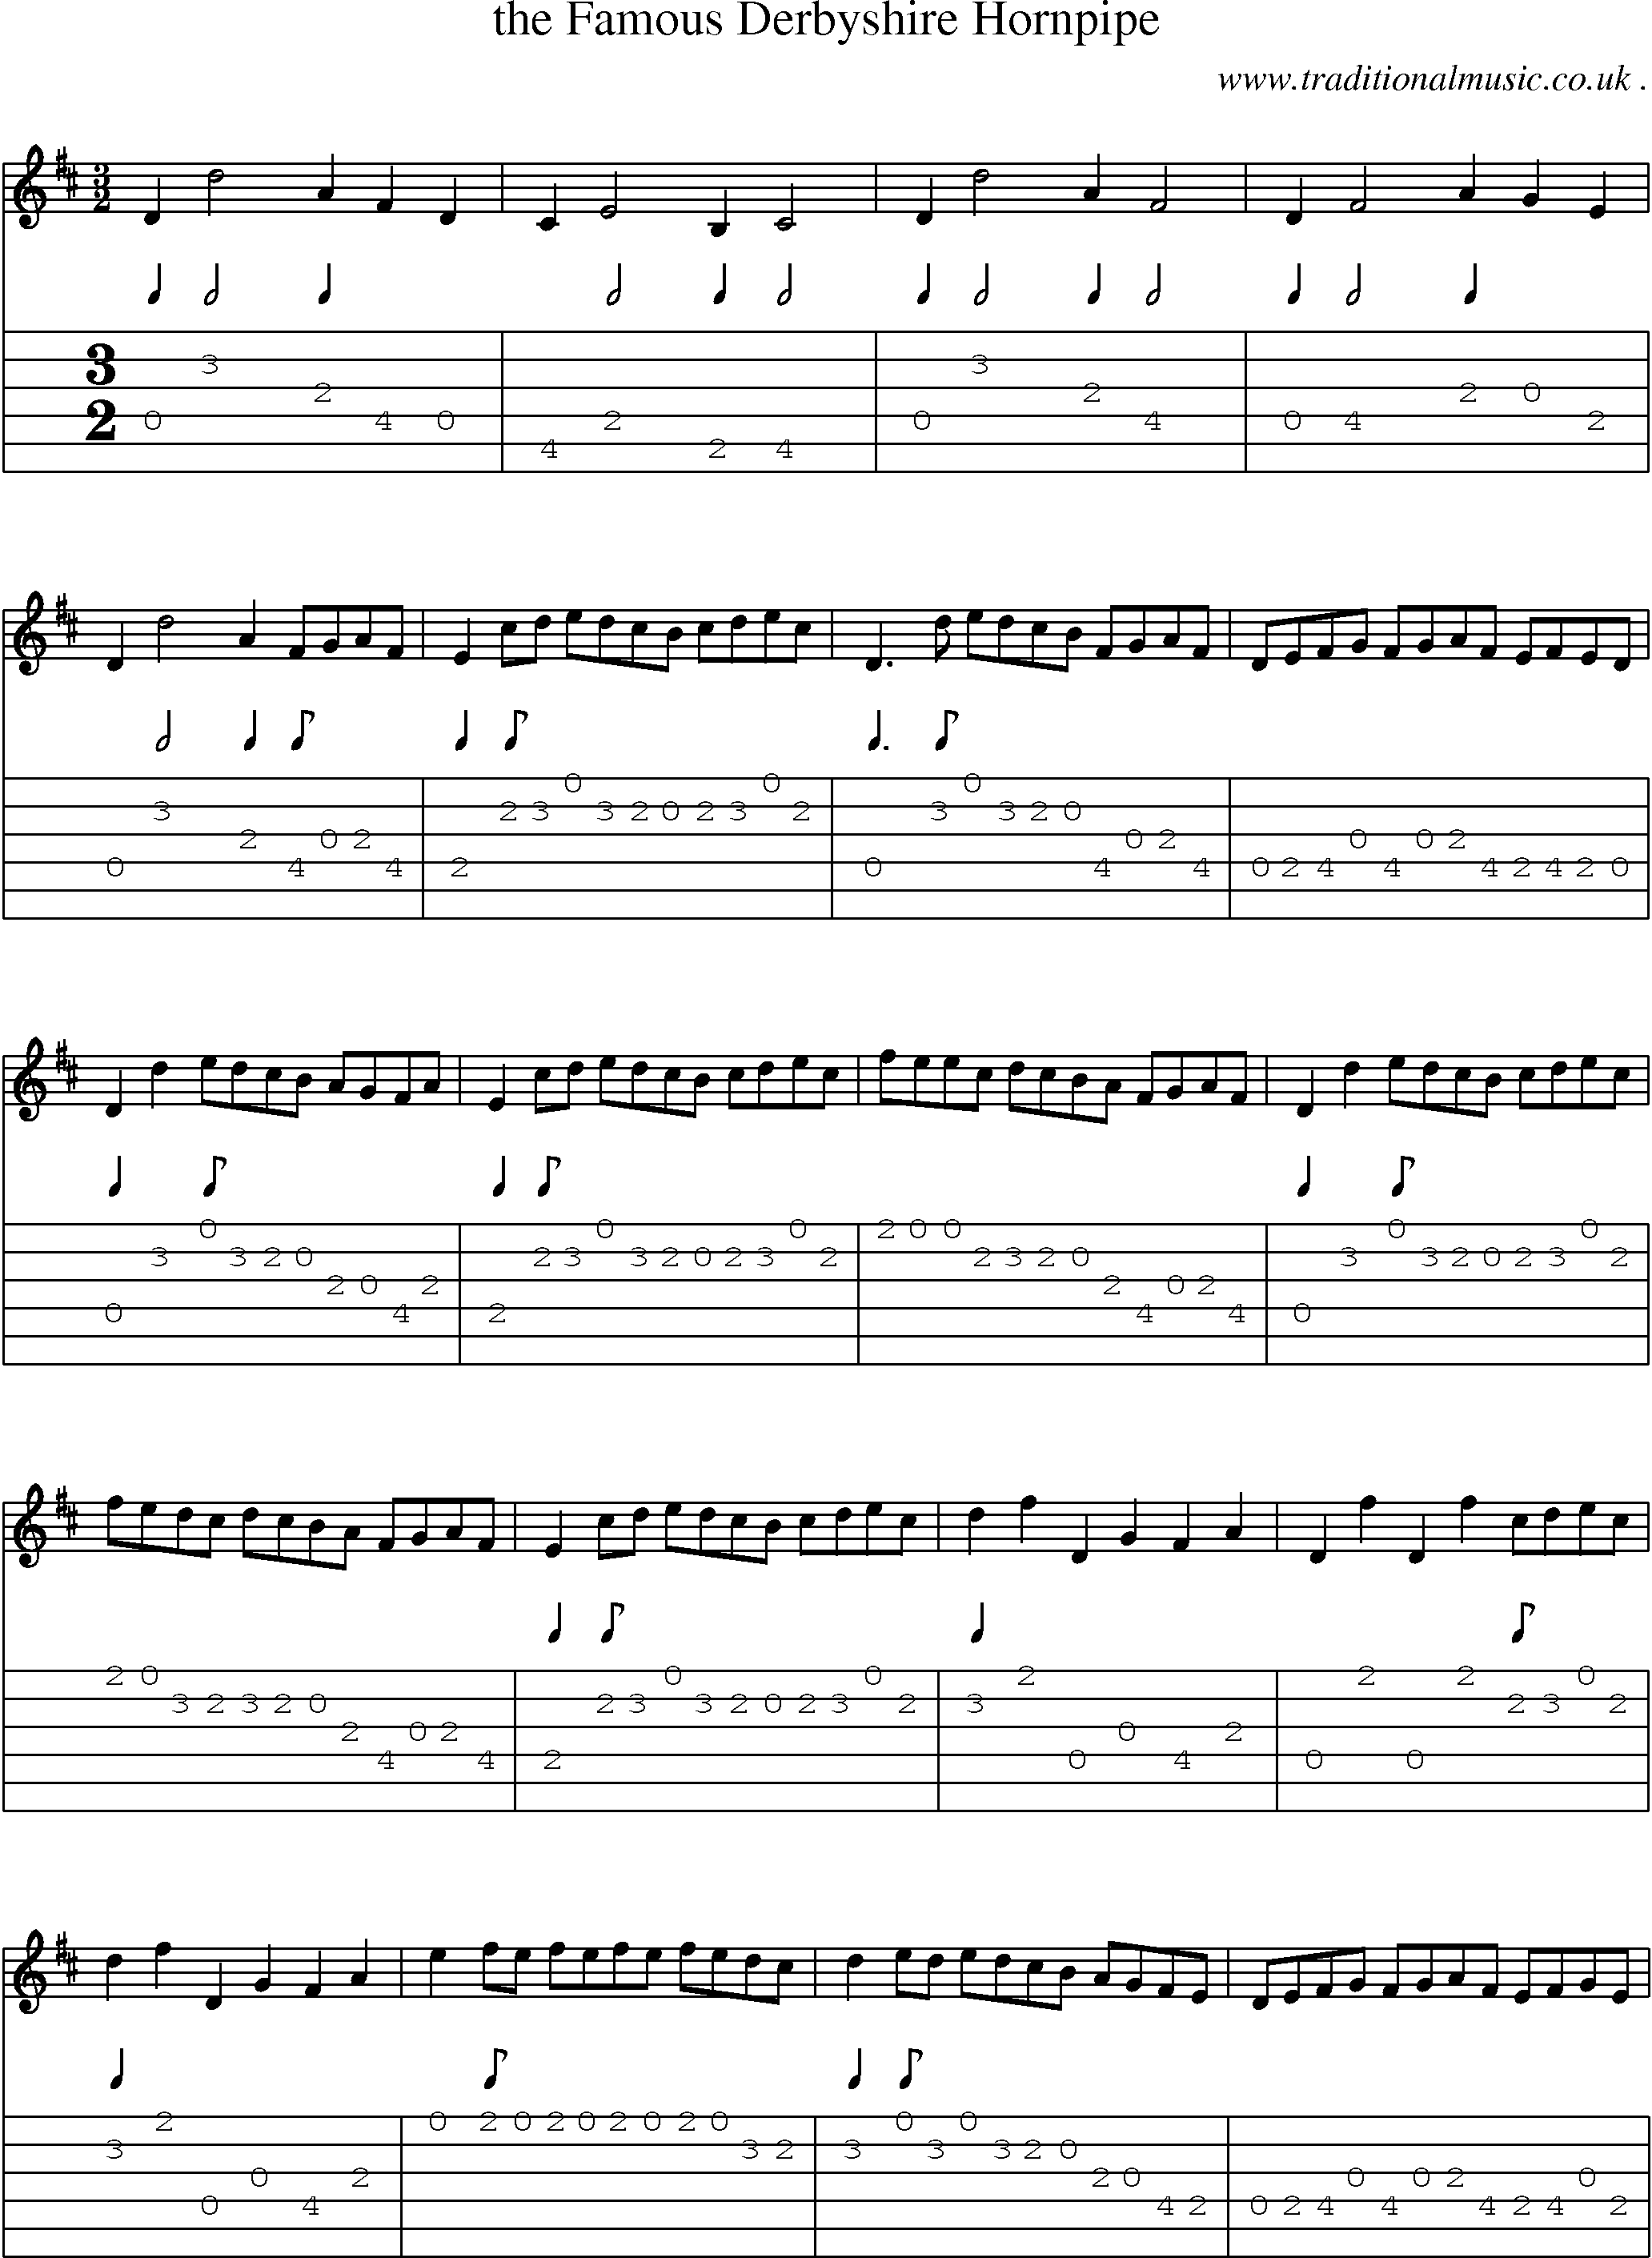 Sheet-Music and Guitar Tabs for The Famous Derbyshire Hornpipe